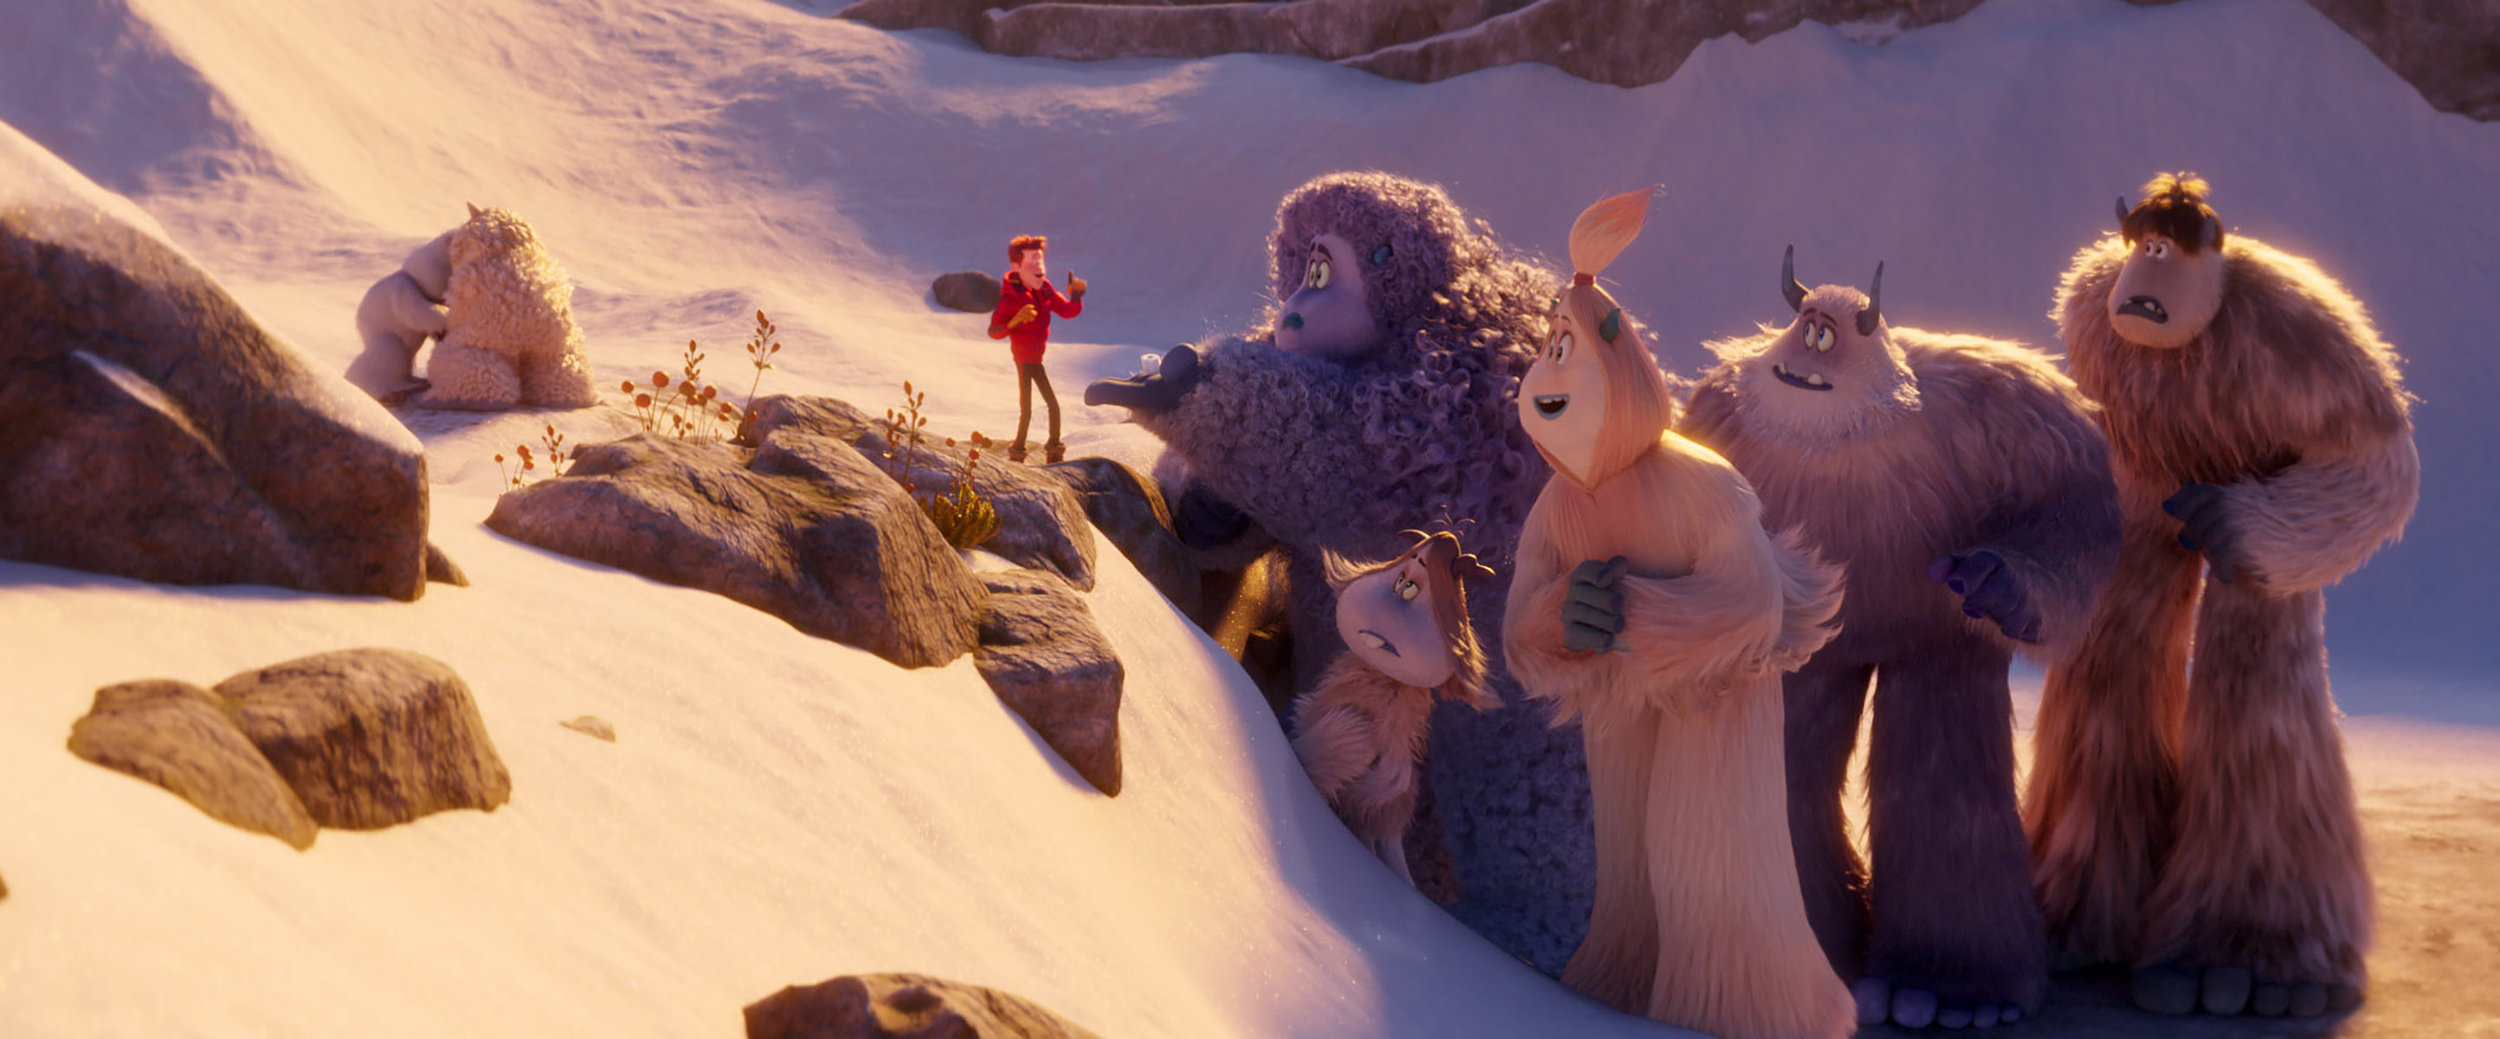 Smallfoot Review: Yeti Animated Feature Steps on Familiar Field - Rendy  Reviews